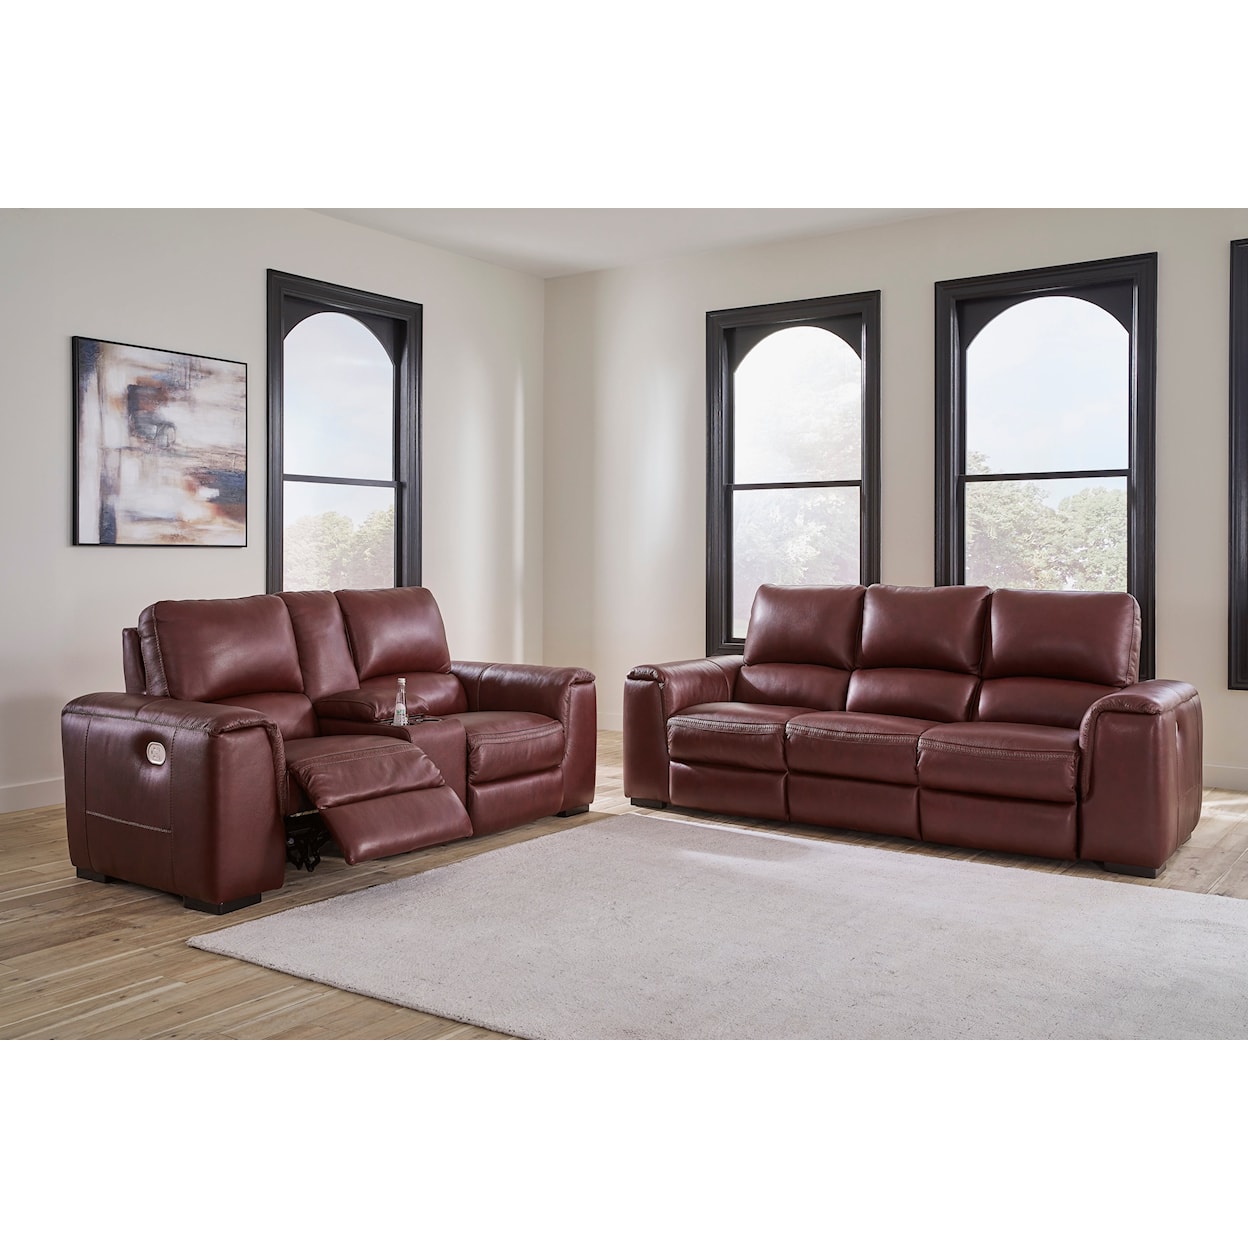 Signature Design by Ashley Furniture Alessandro Living Room Set